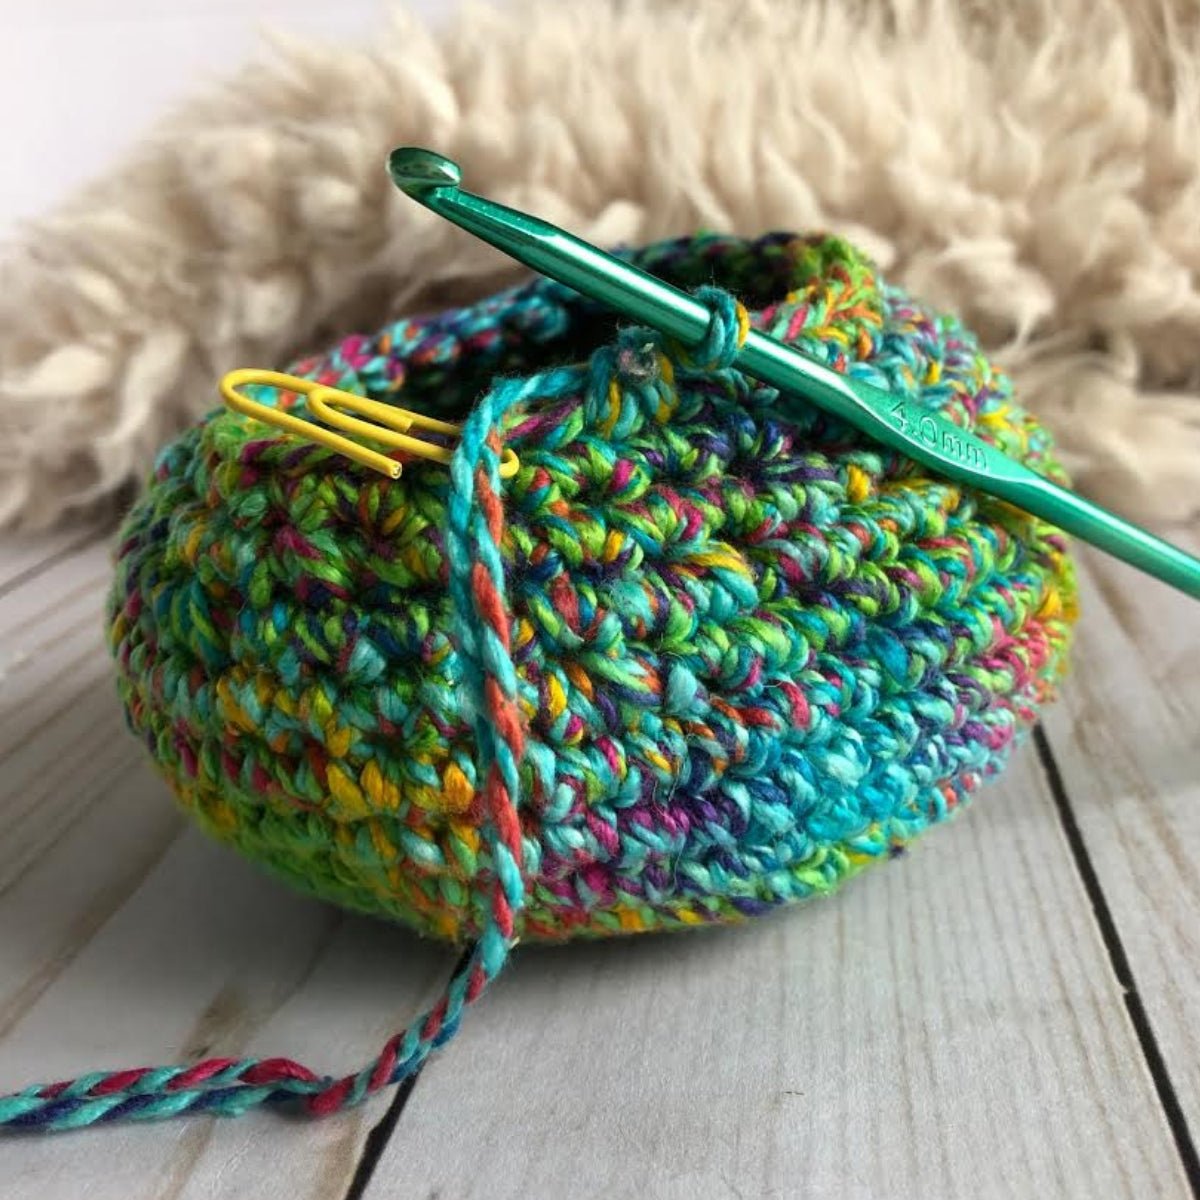 Learn to Crochet: All about Crochet hooks, Needles and Notions